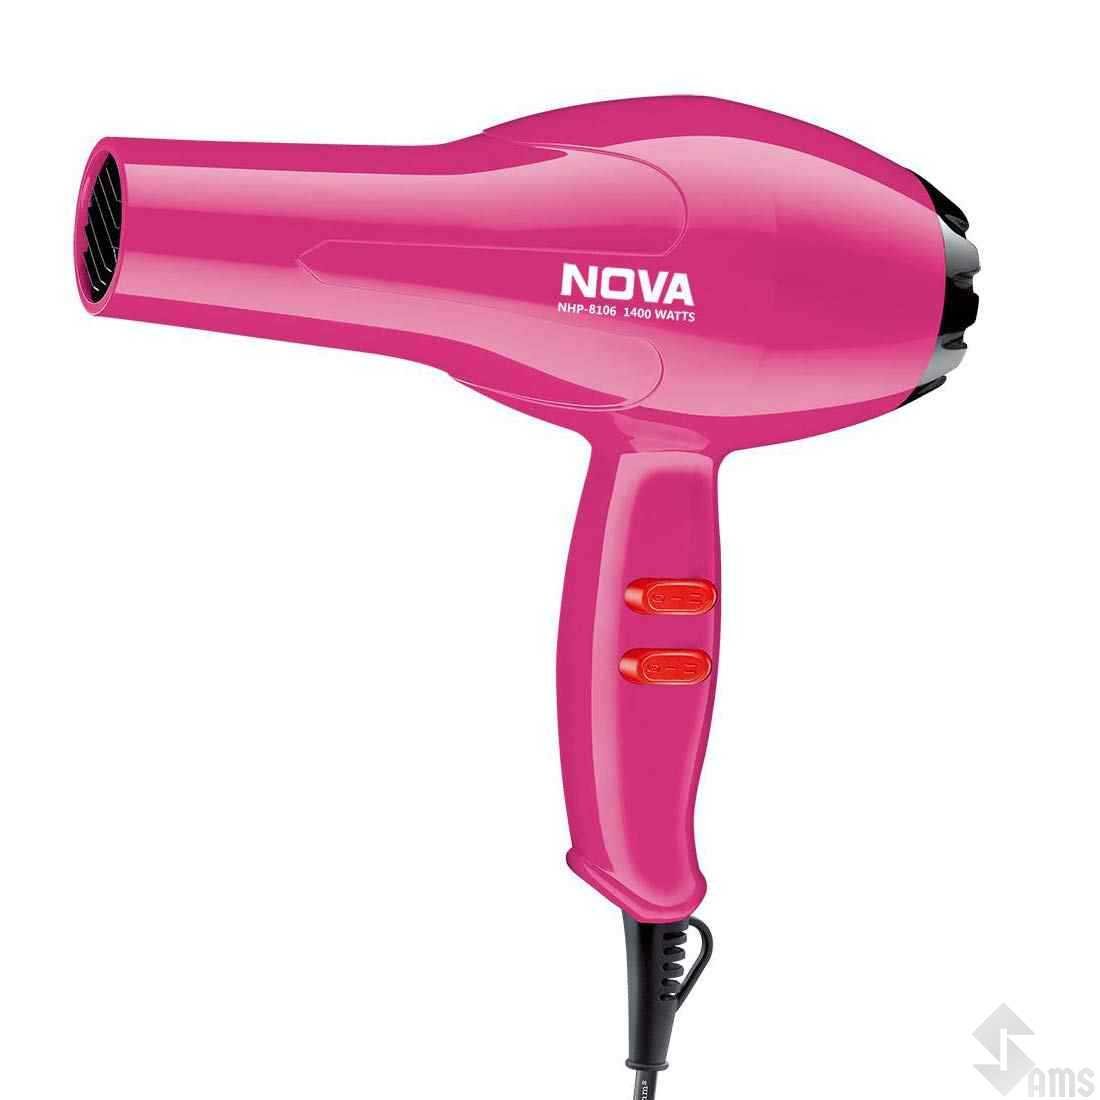 Nova 1290 Professional Electric Foldable Hair Dryer With 2 Speed Control  1000 Watts  Pink And White